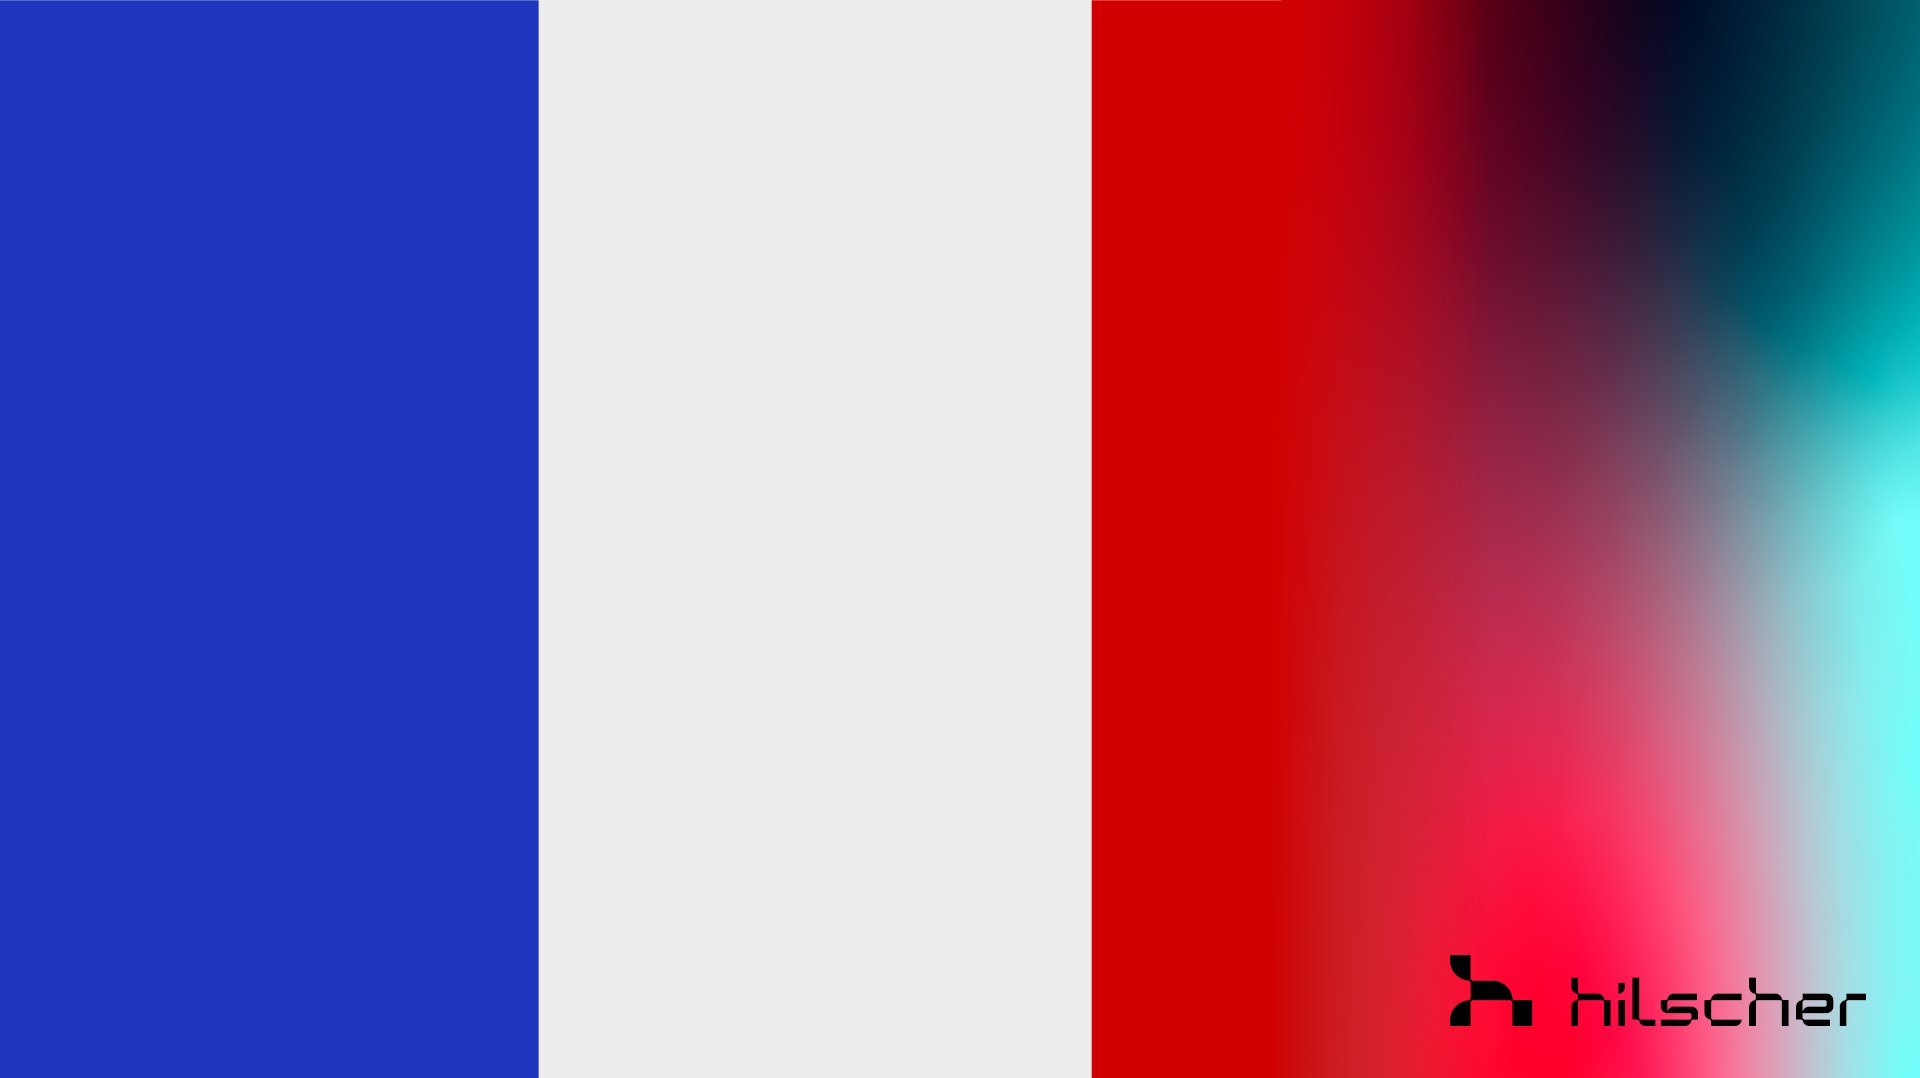 The flag of France. On the right side of the picture is a fade to a colorful space, accounting for nearly a quarter of the image.